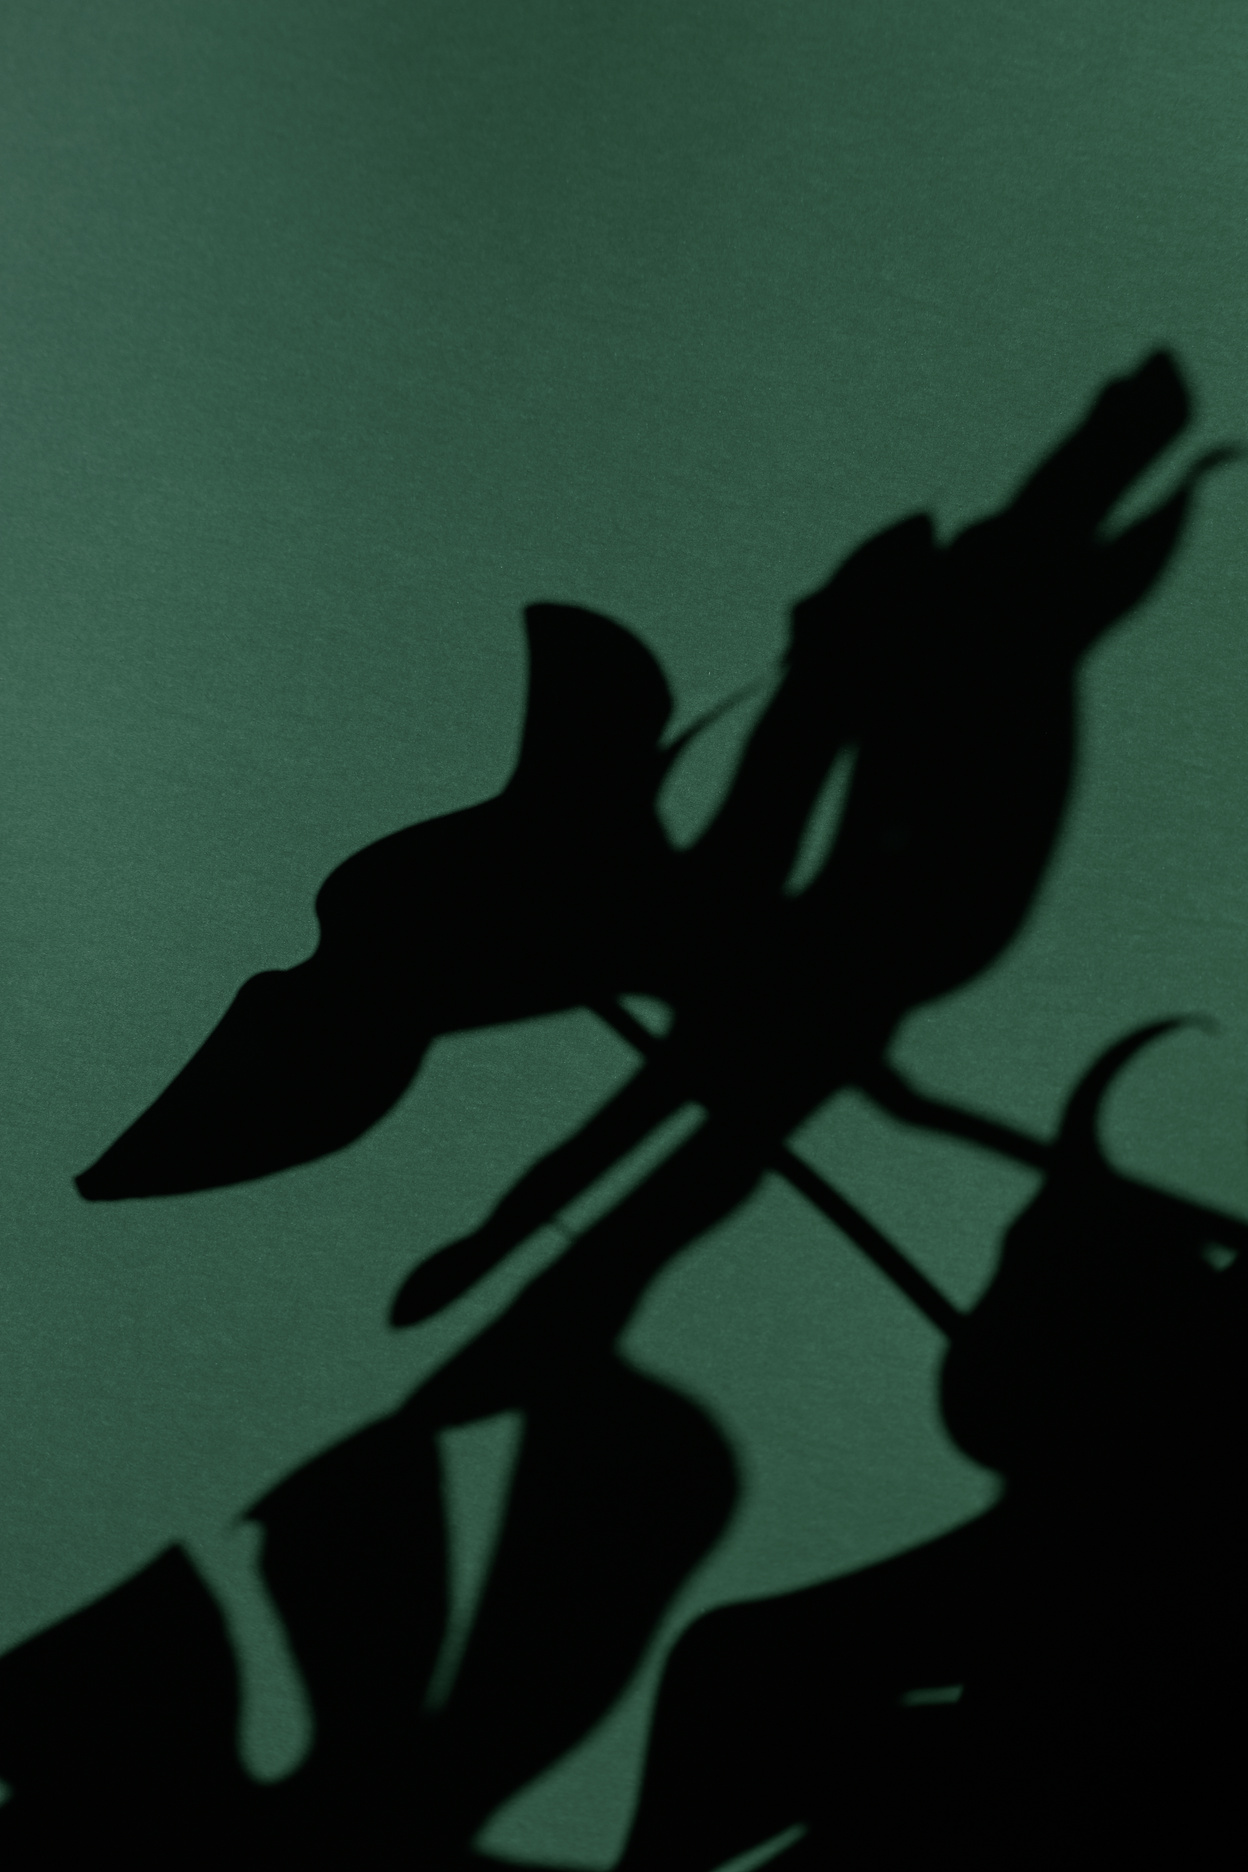 Shadows of Monstera Leaves on Green Background 